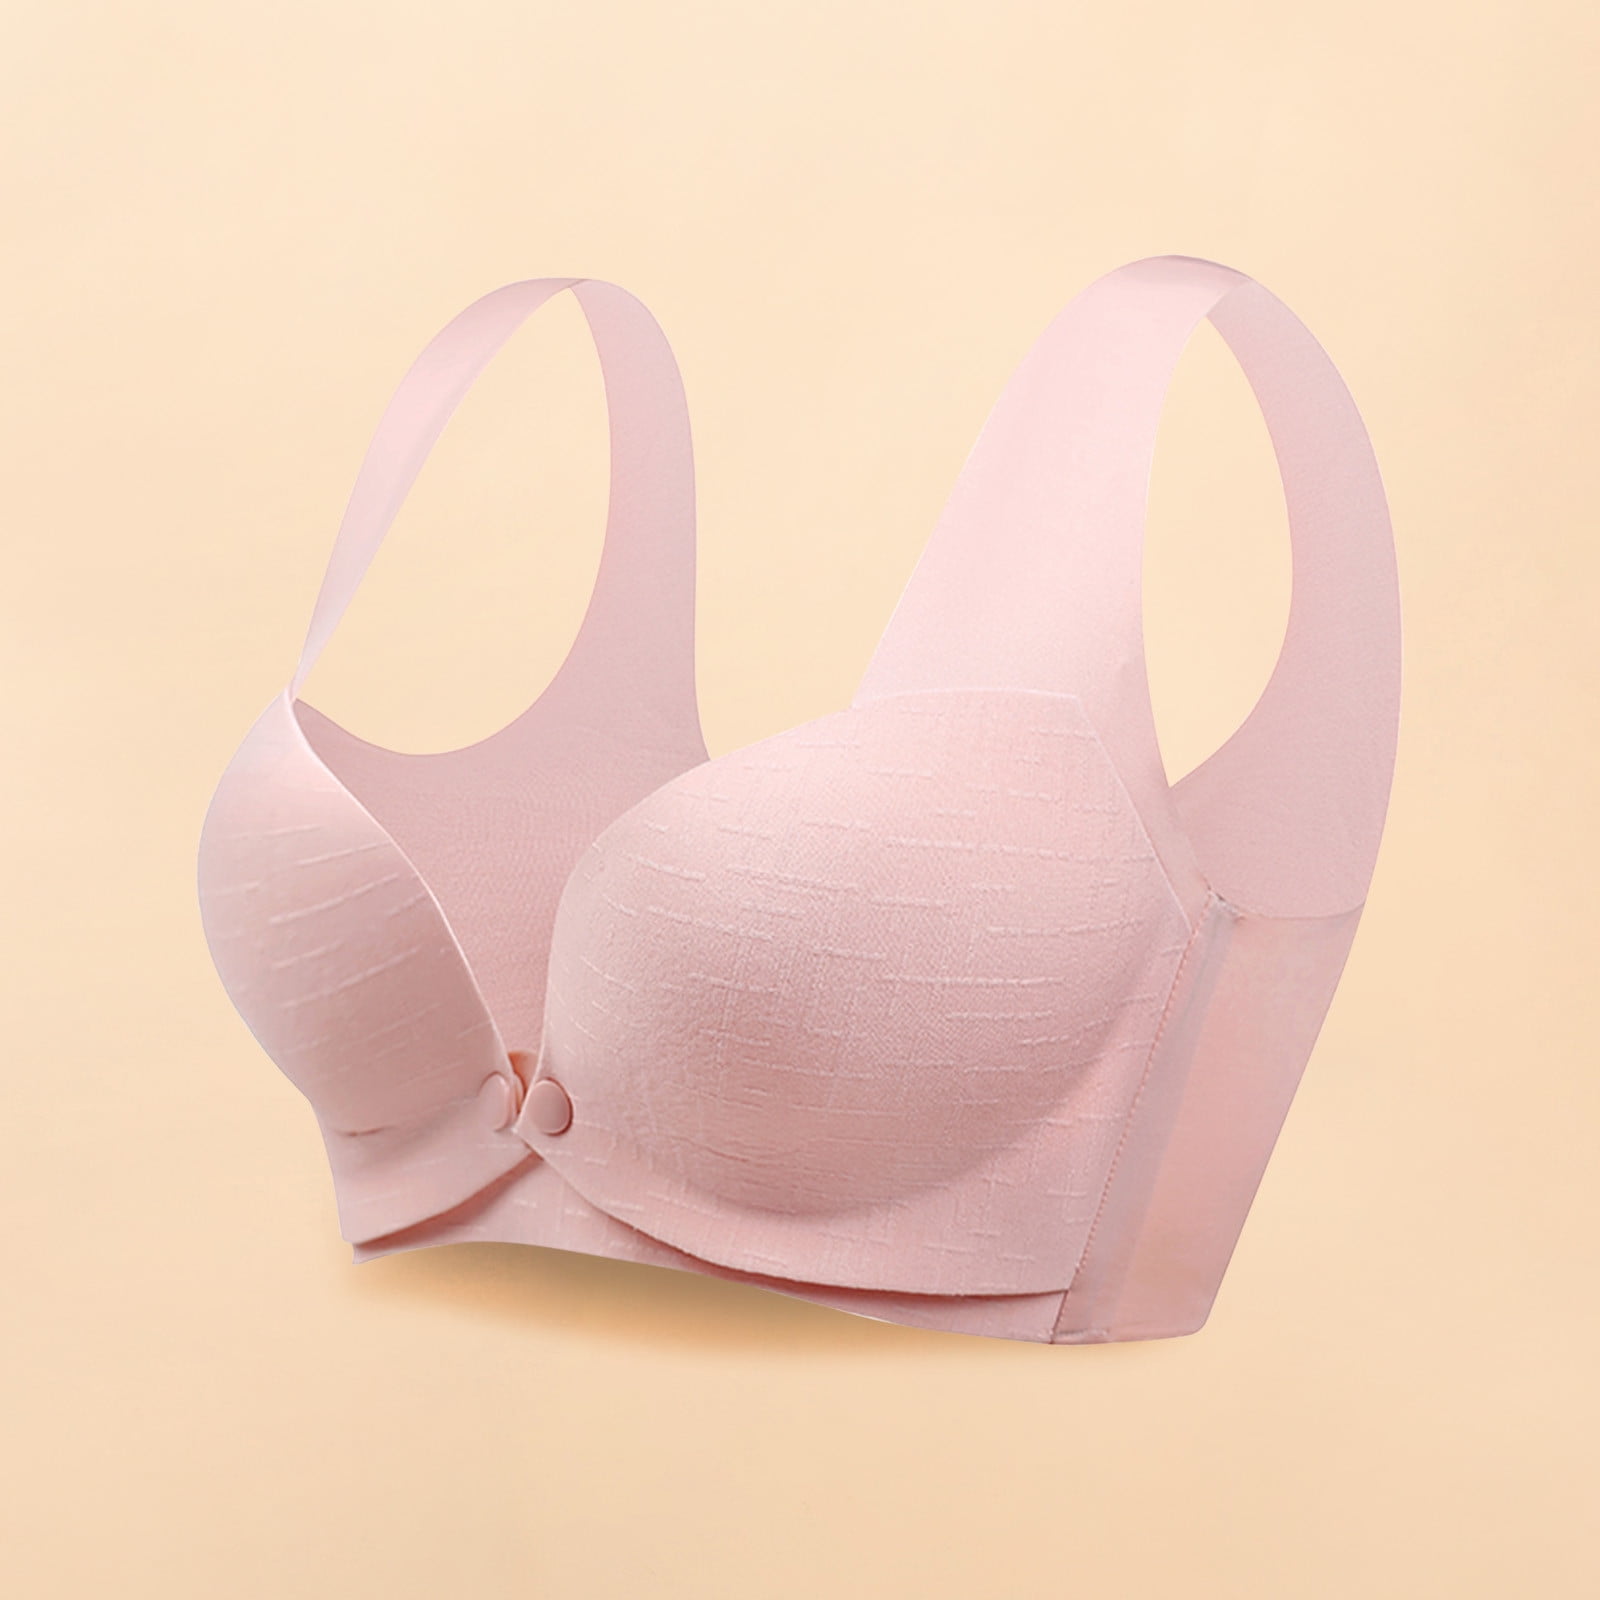 SELONE Nursing Bras for Breastfeeding No Underwire for Large Bust